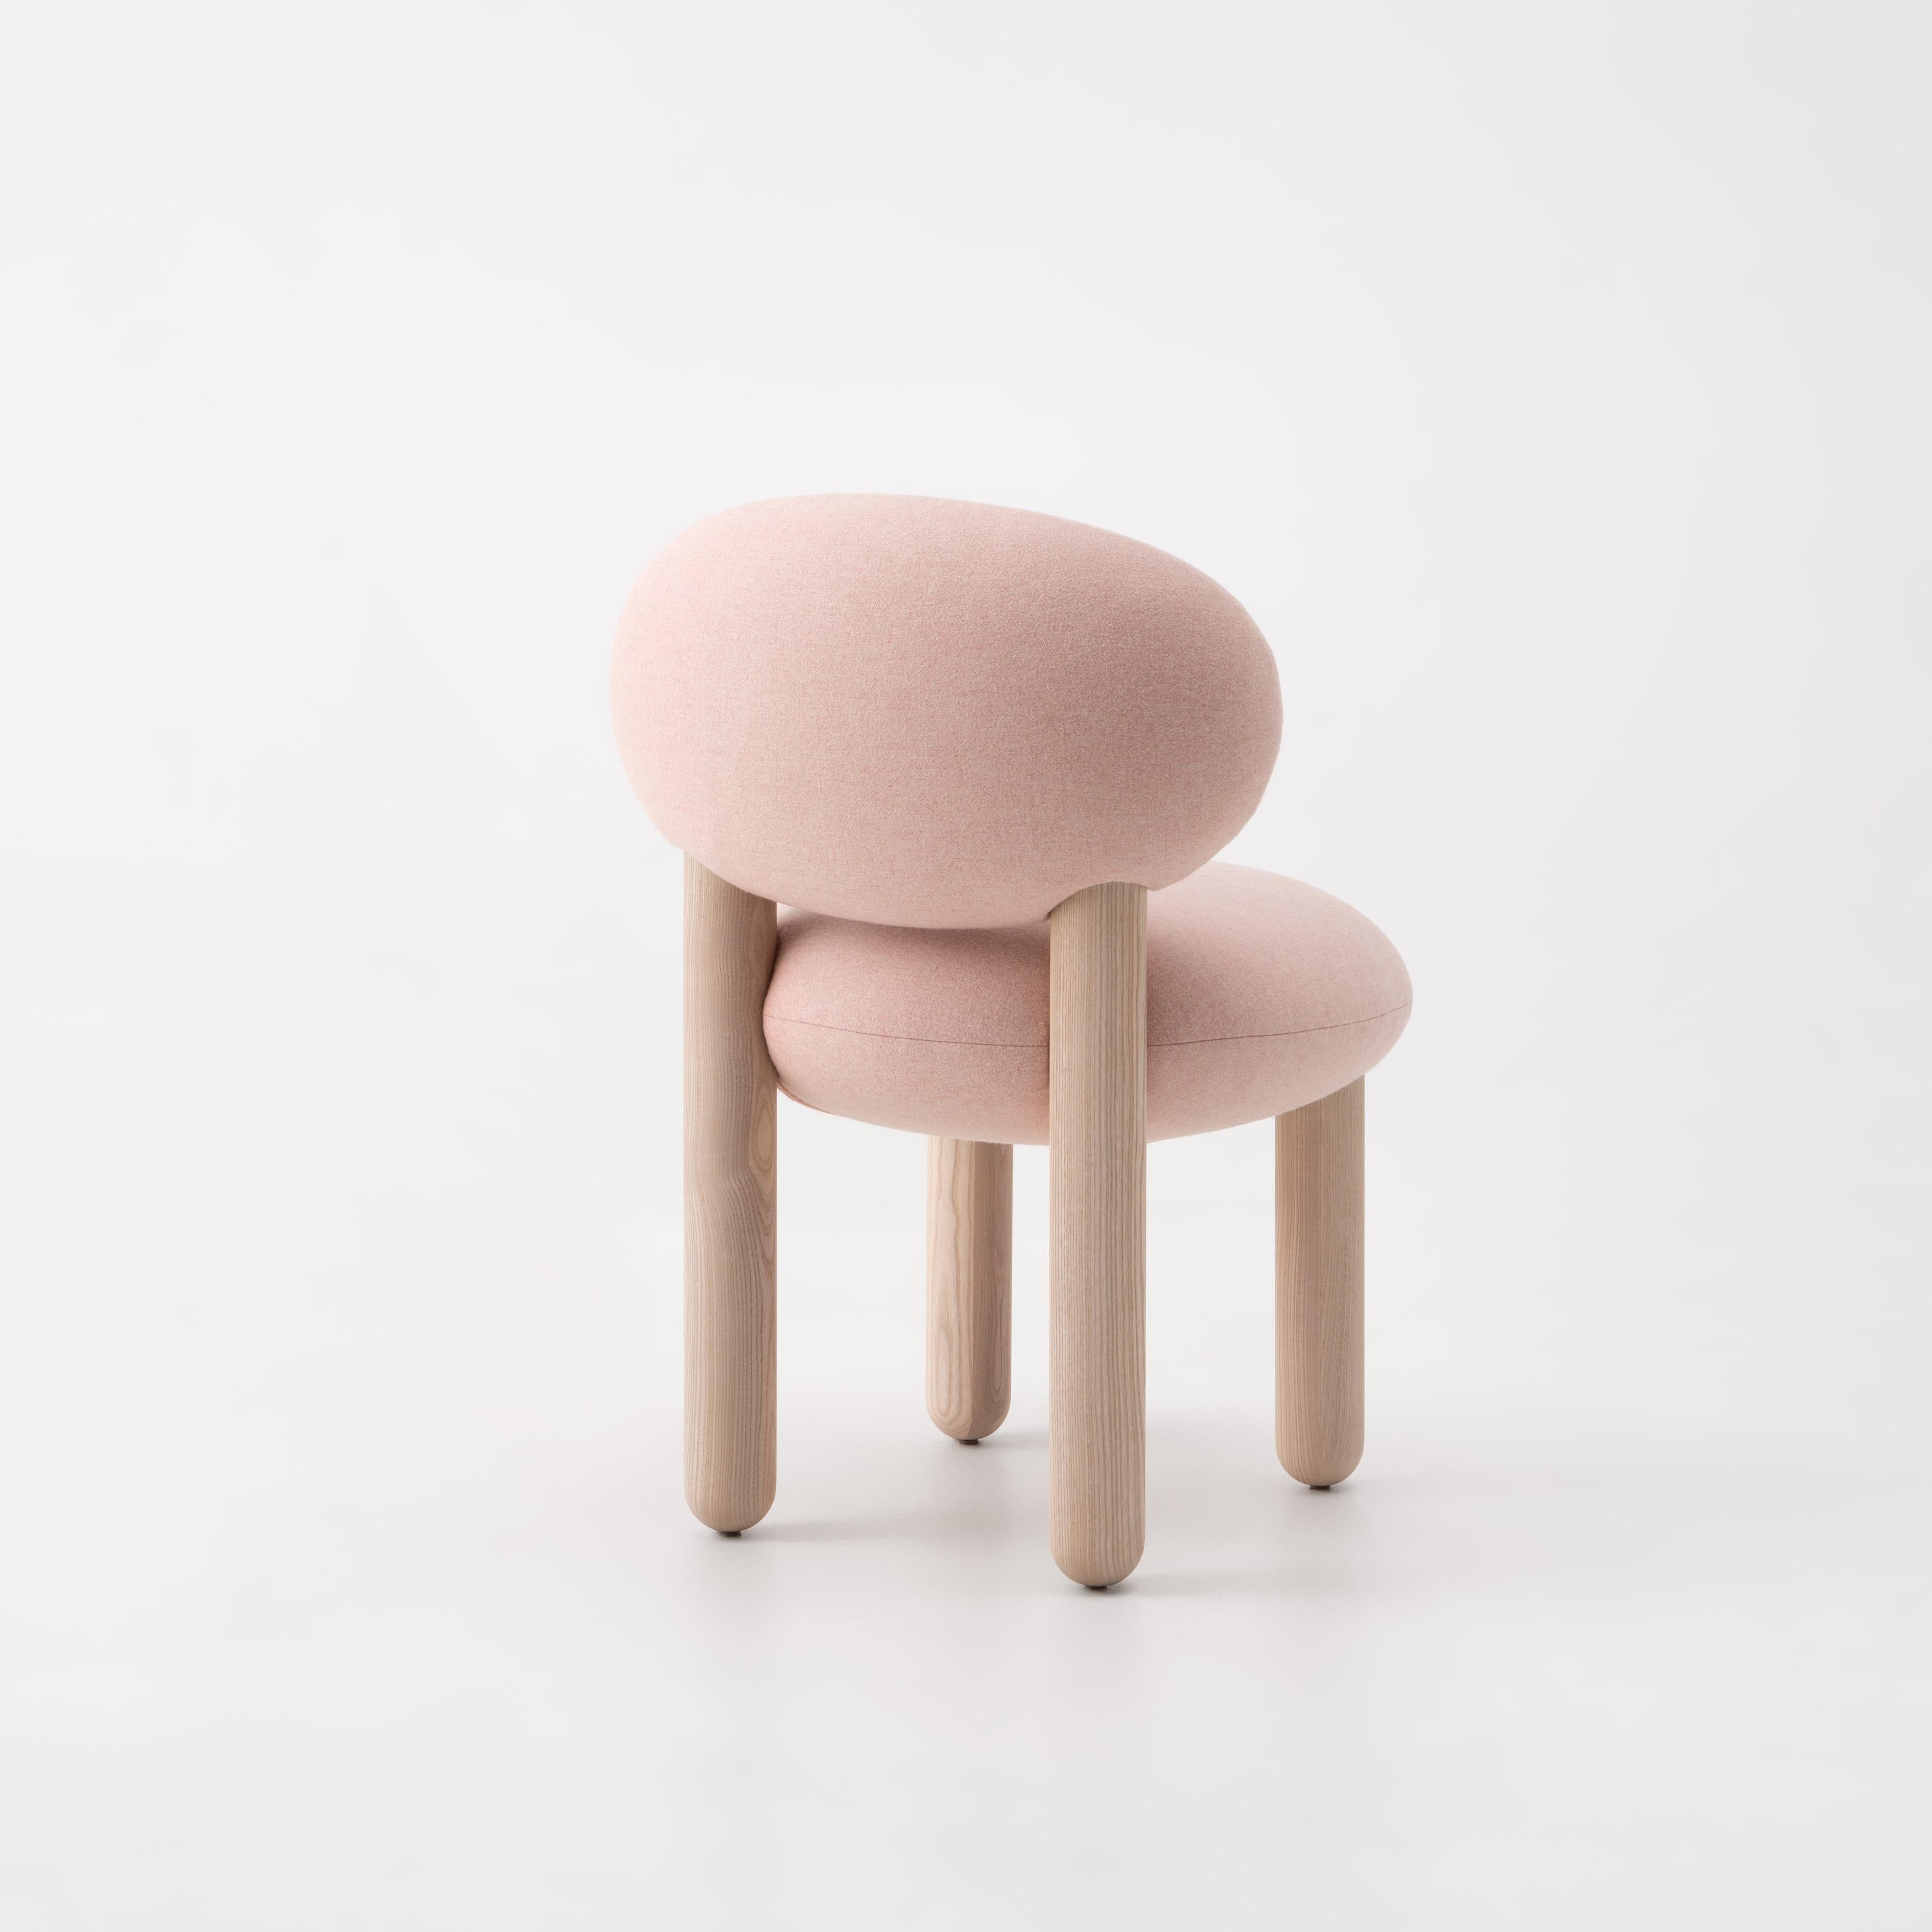 Designer: Kateryna Sokolova
Materials: wood, plywood, metal, molded foam, textile
Available in a wide range of colors and other finishes and fabrics on request.
Dimensions: H 78 cm, W 55 cm, D 61 cm  seat H 47 cm

Fabric Wool

The 